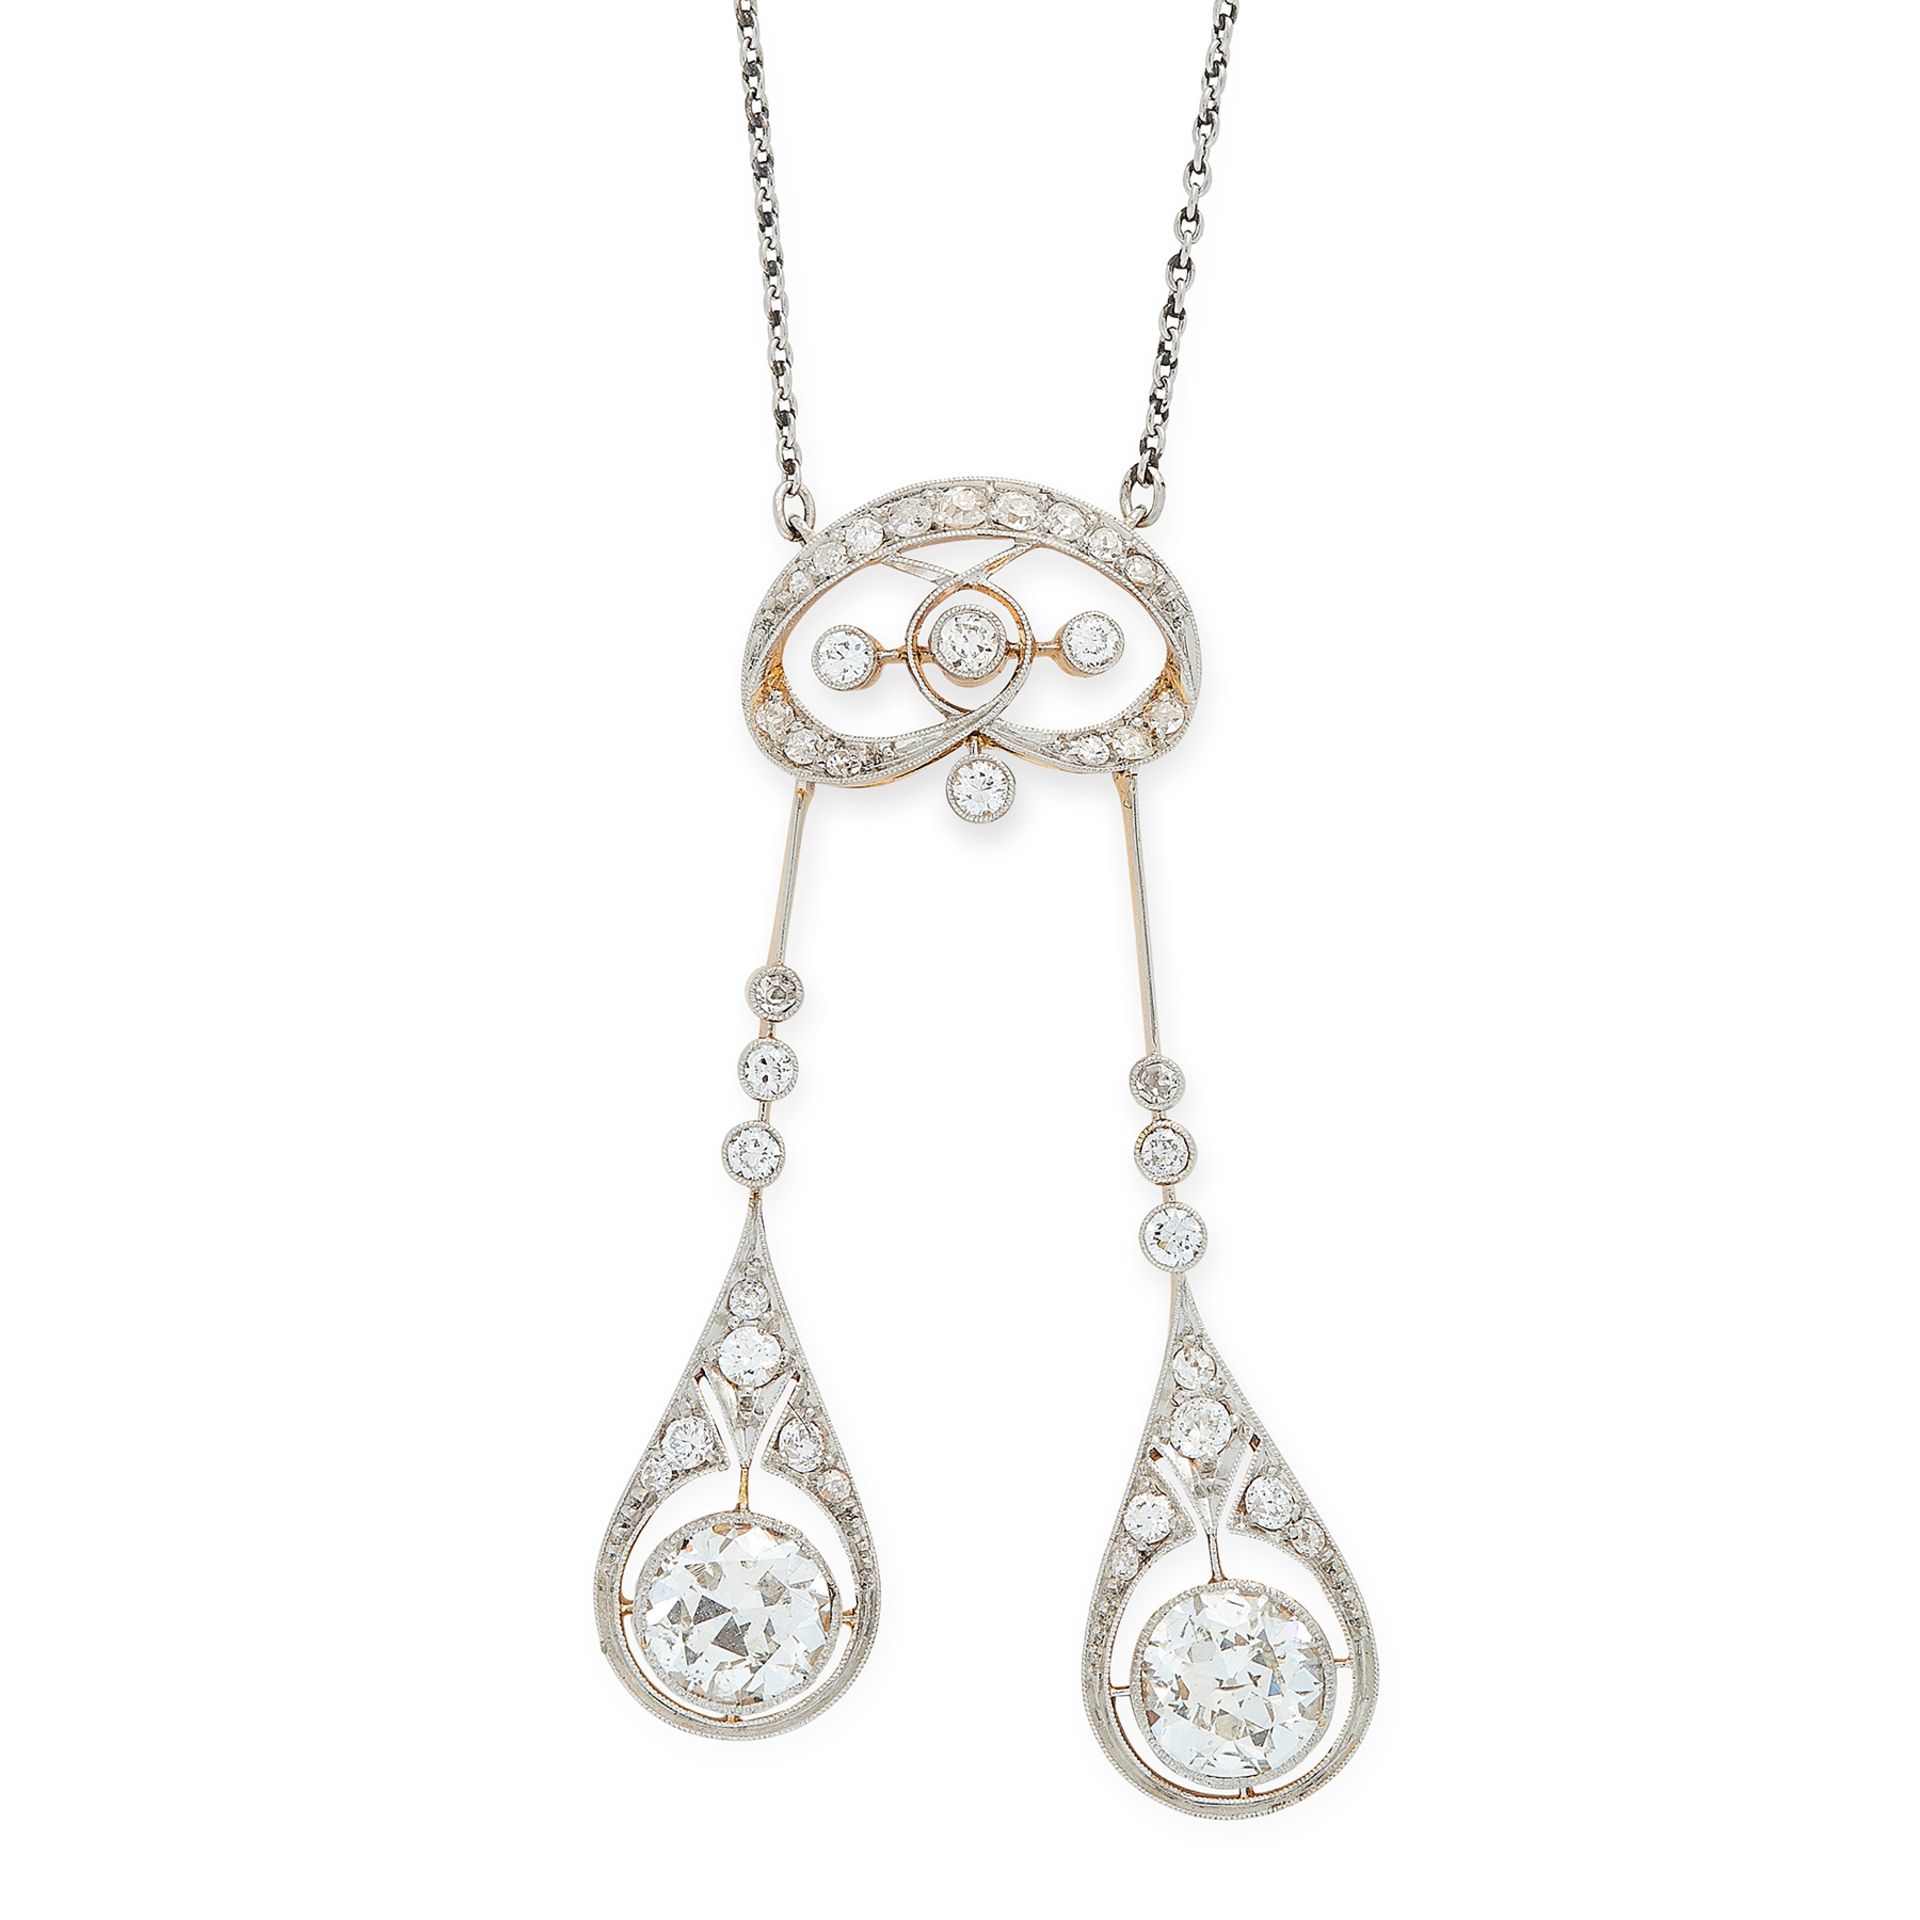 AN ANTIQUE DIAMOND LAVALIER NECKLACE in yellow gold and platinum, the central diamond motif